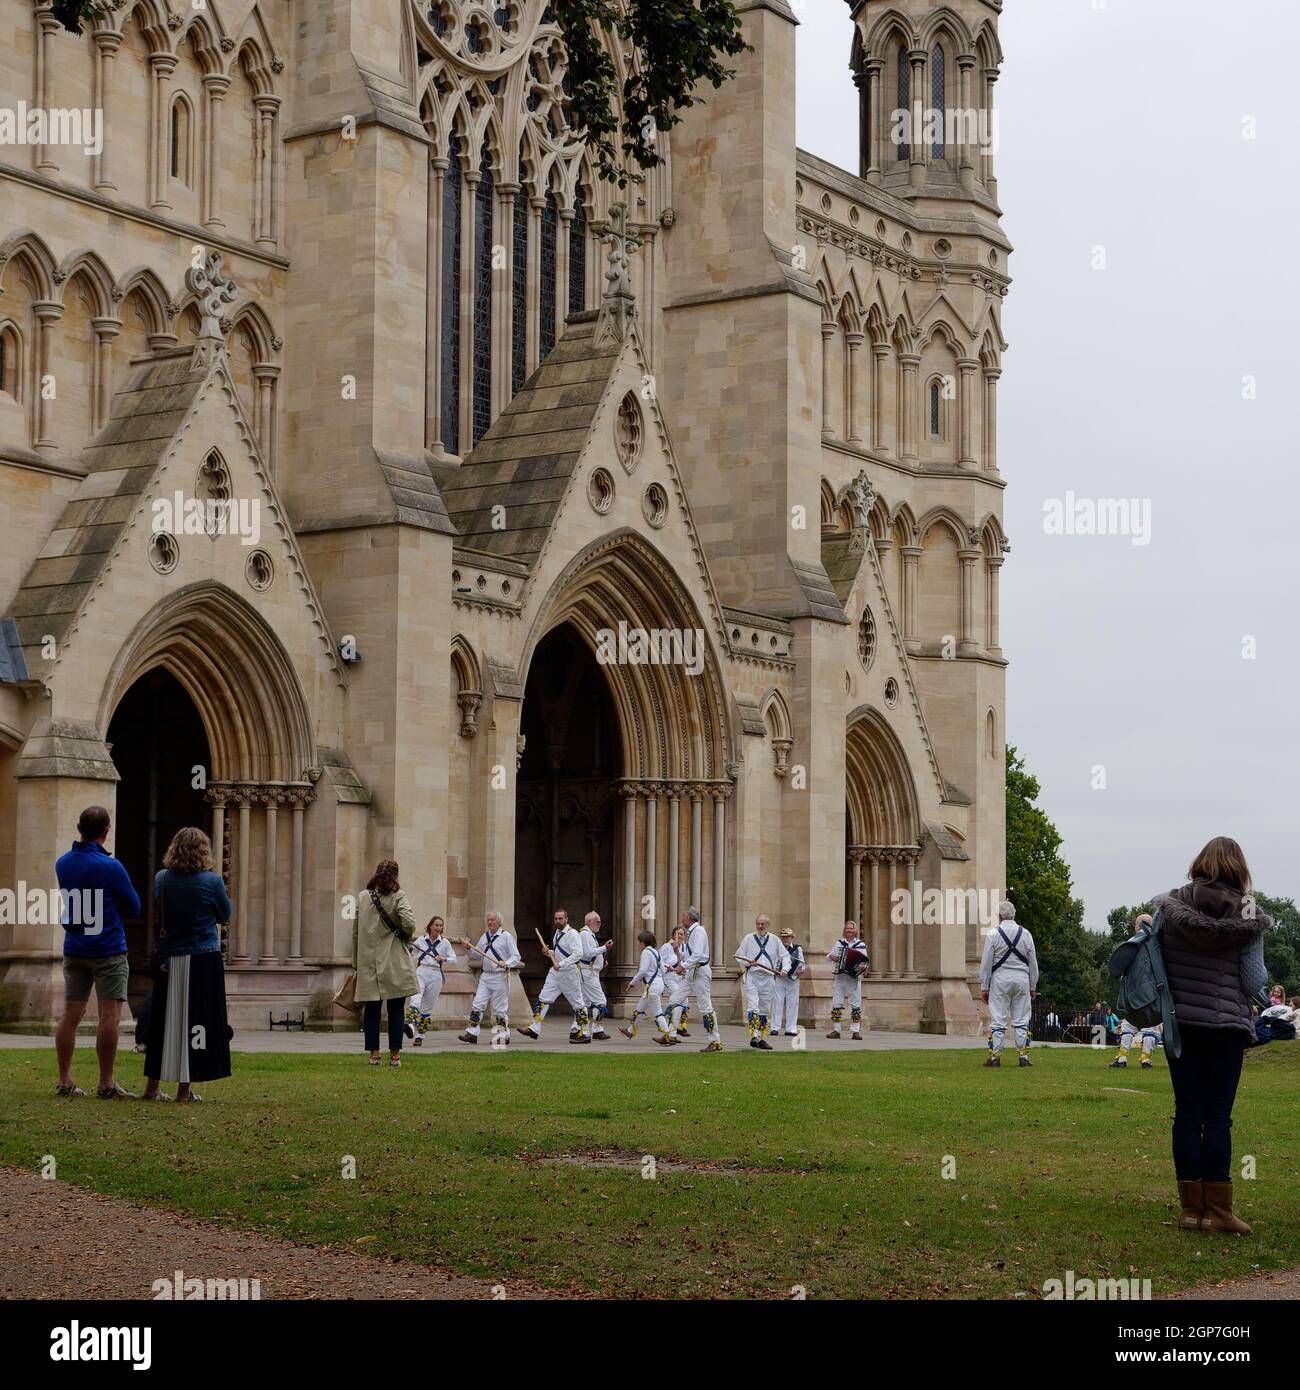 St Albans, Hertfordshire, England, September 21 2021: People watching Morris Dancers perform a traditional folk dance in front of the Cathedral. Stock Photo